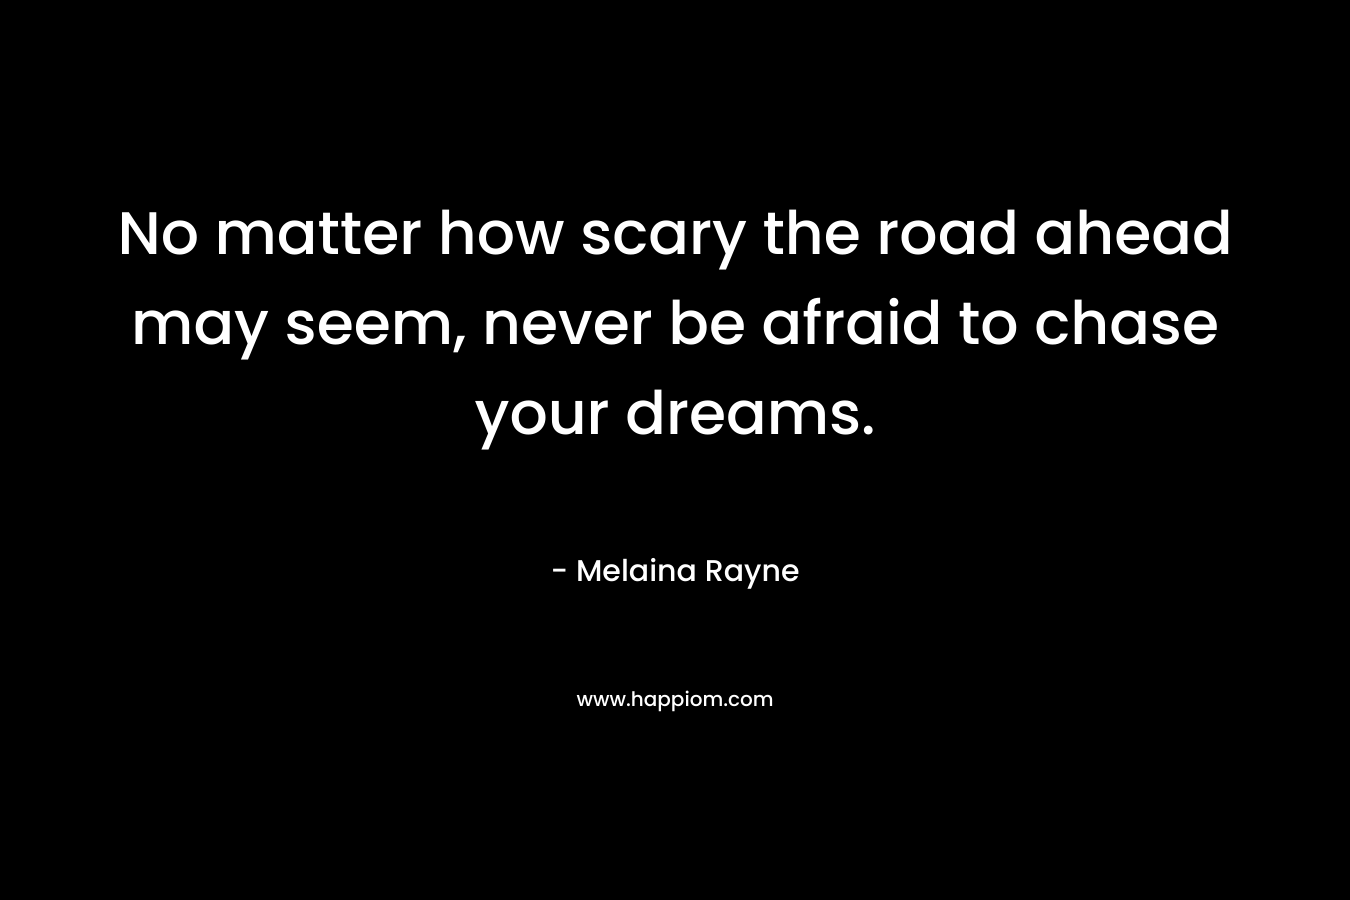 No matter how scary the road ahead may seem, never be afraid to chase your dreams.